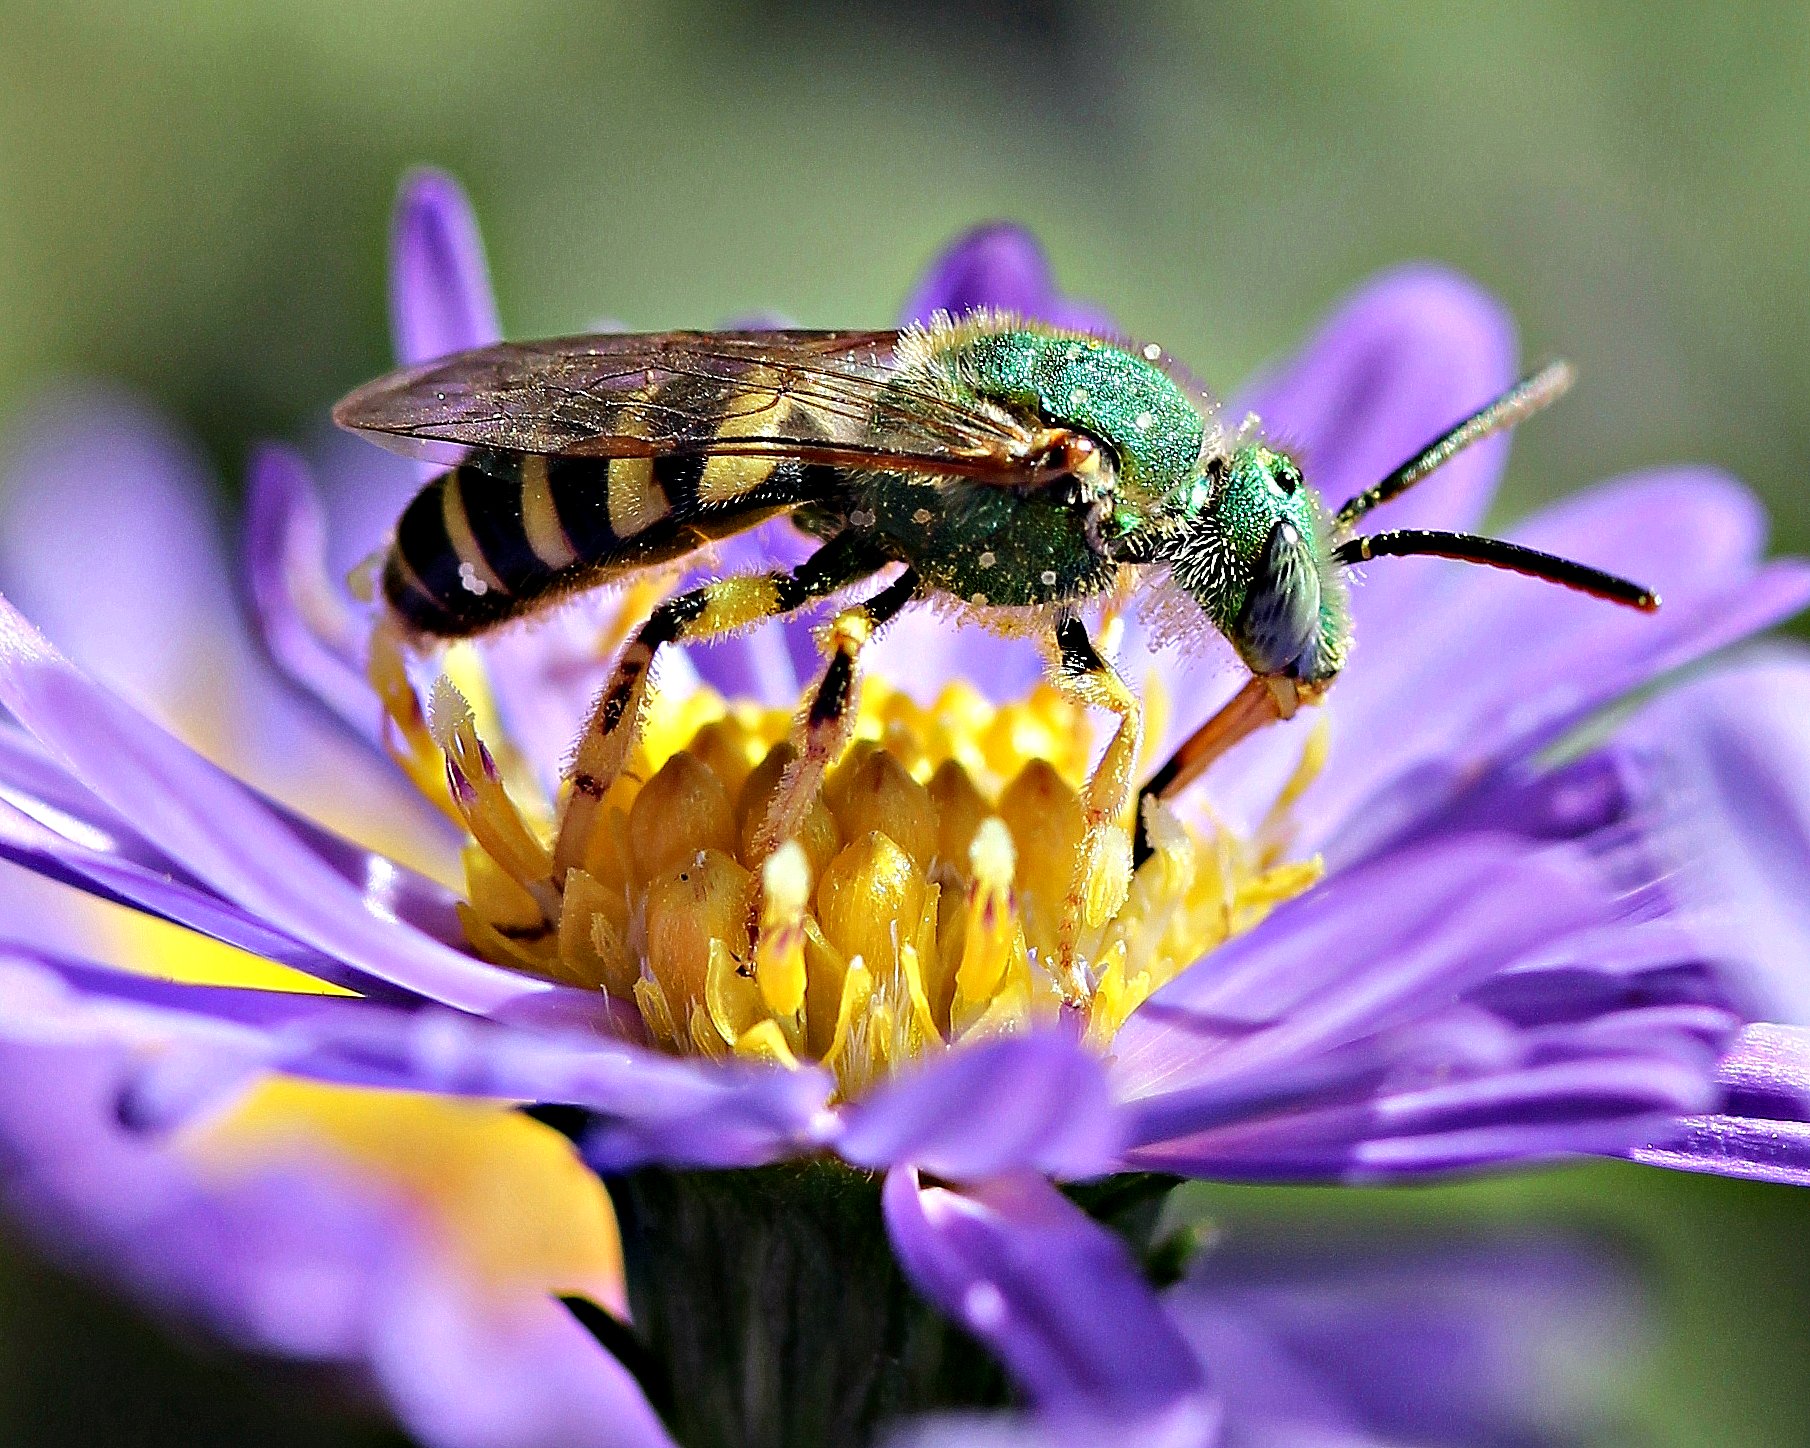 Sweat bees are one of the more obscure pollinator species that NatureServe believes need more scientific scrutiny. Photo by Patty O'Hearn Kickham